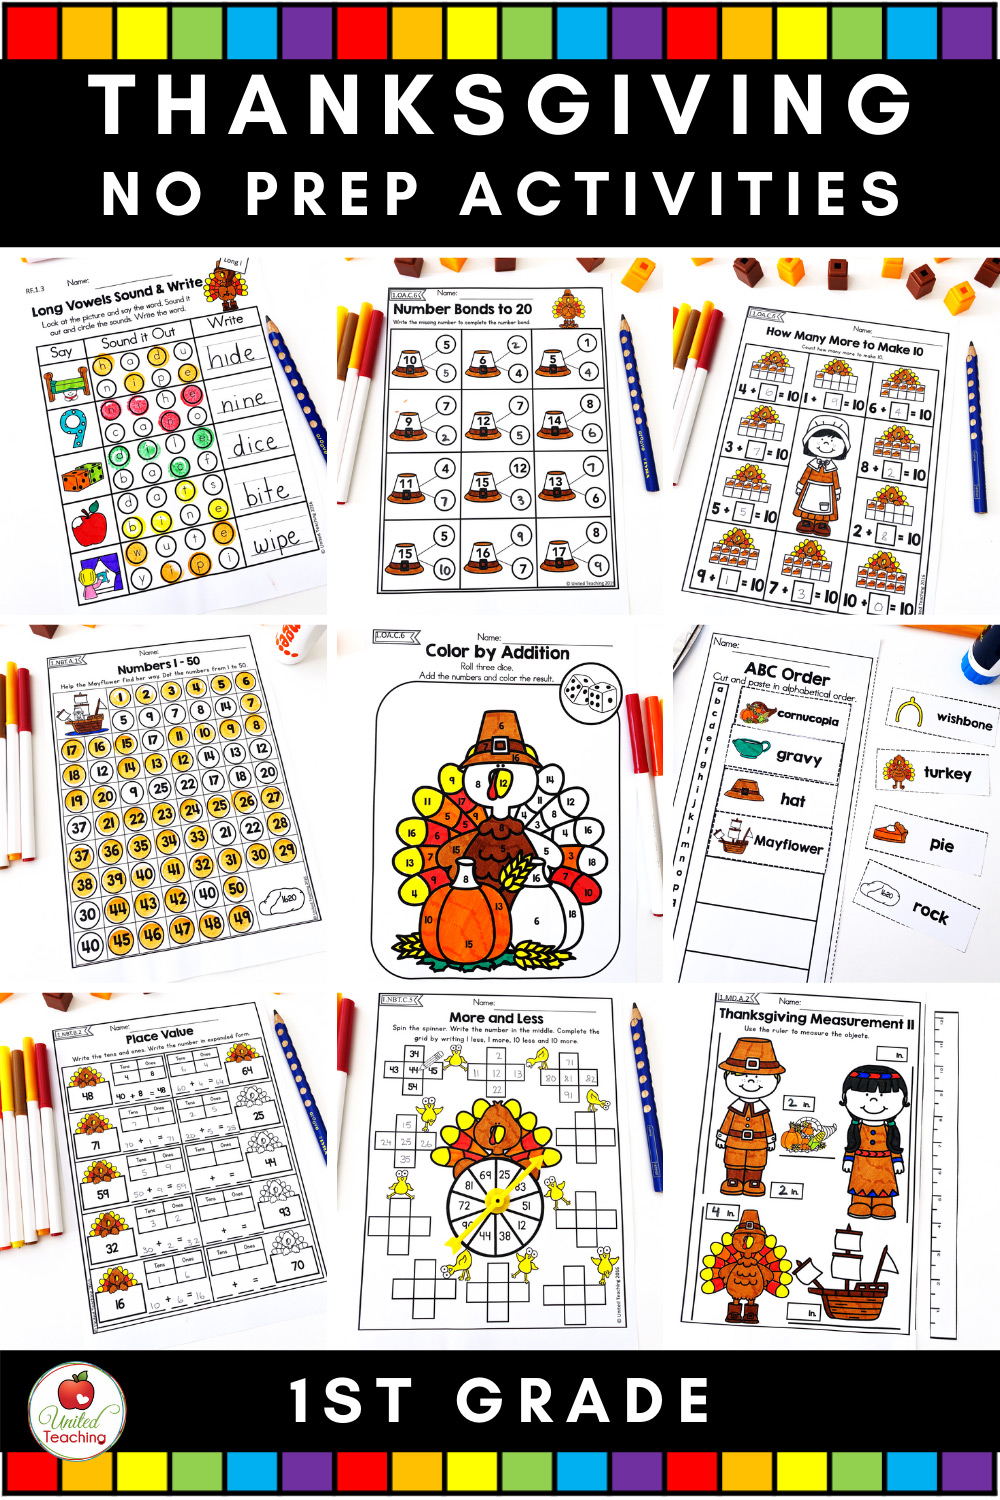 Thanksgiving Worksheets and Activities for 1st Grade save for later Pin